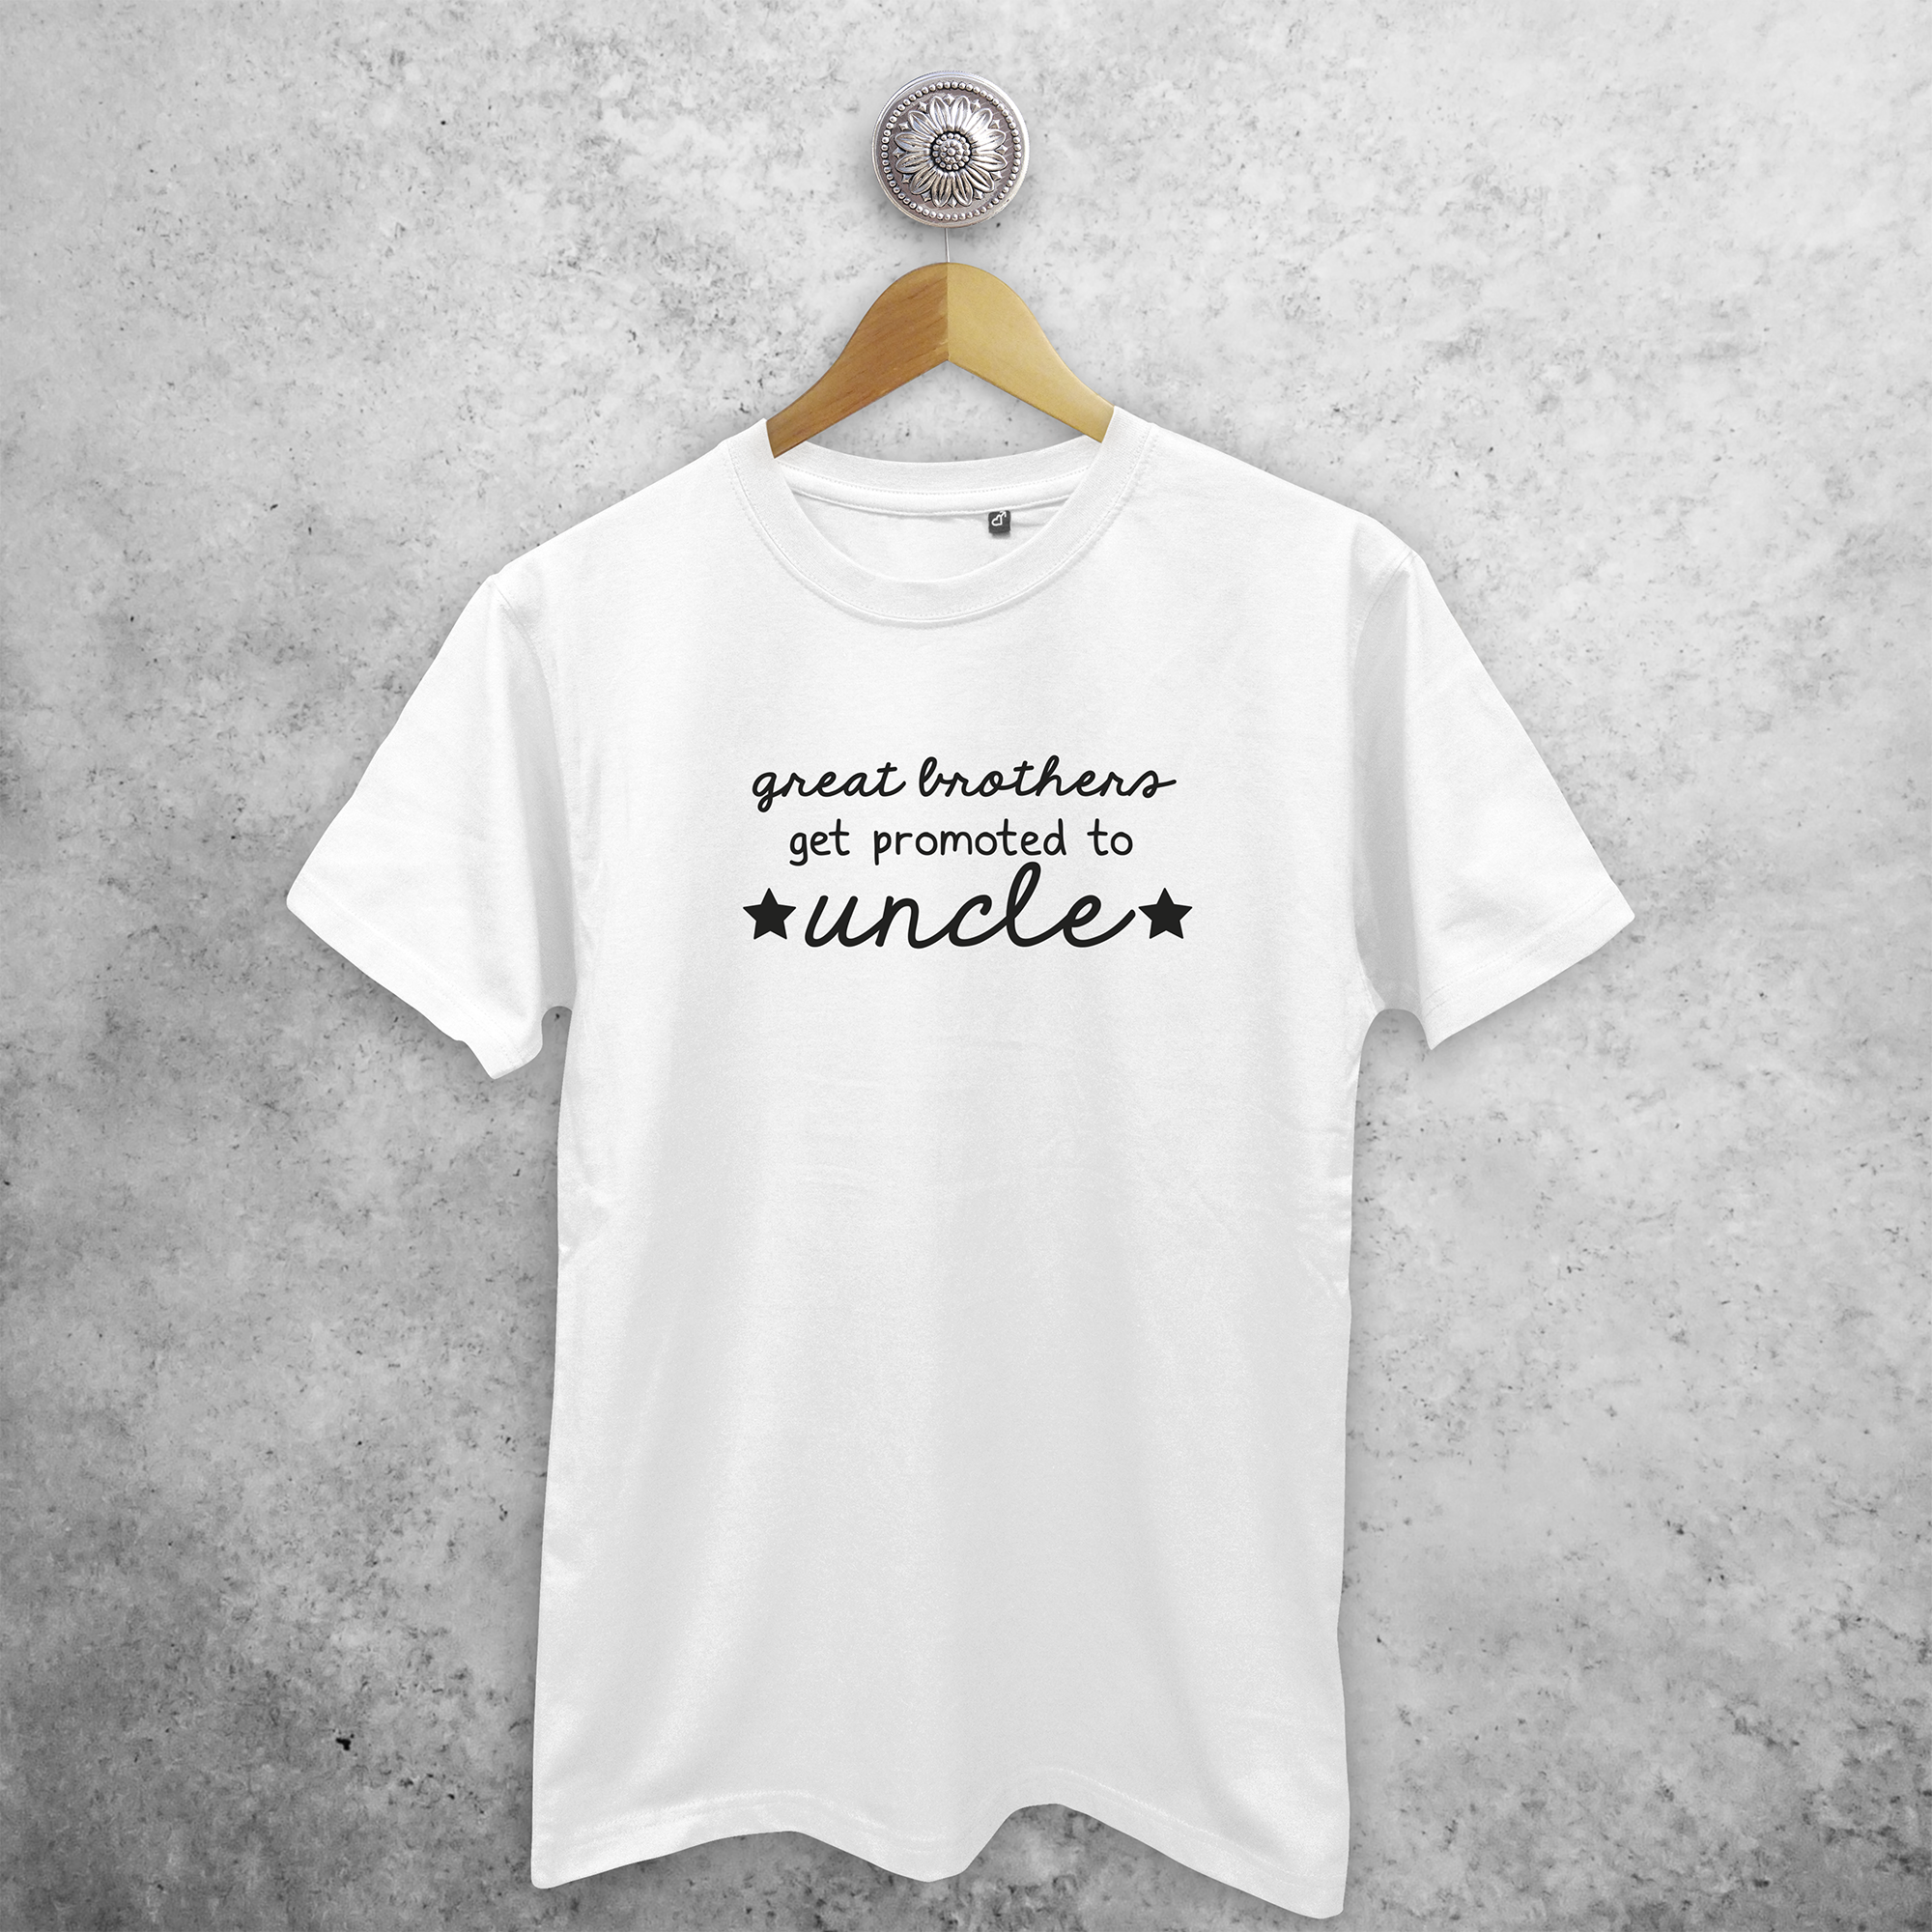 'Great brothers get promoted to uncle' volwassene shirt